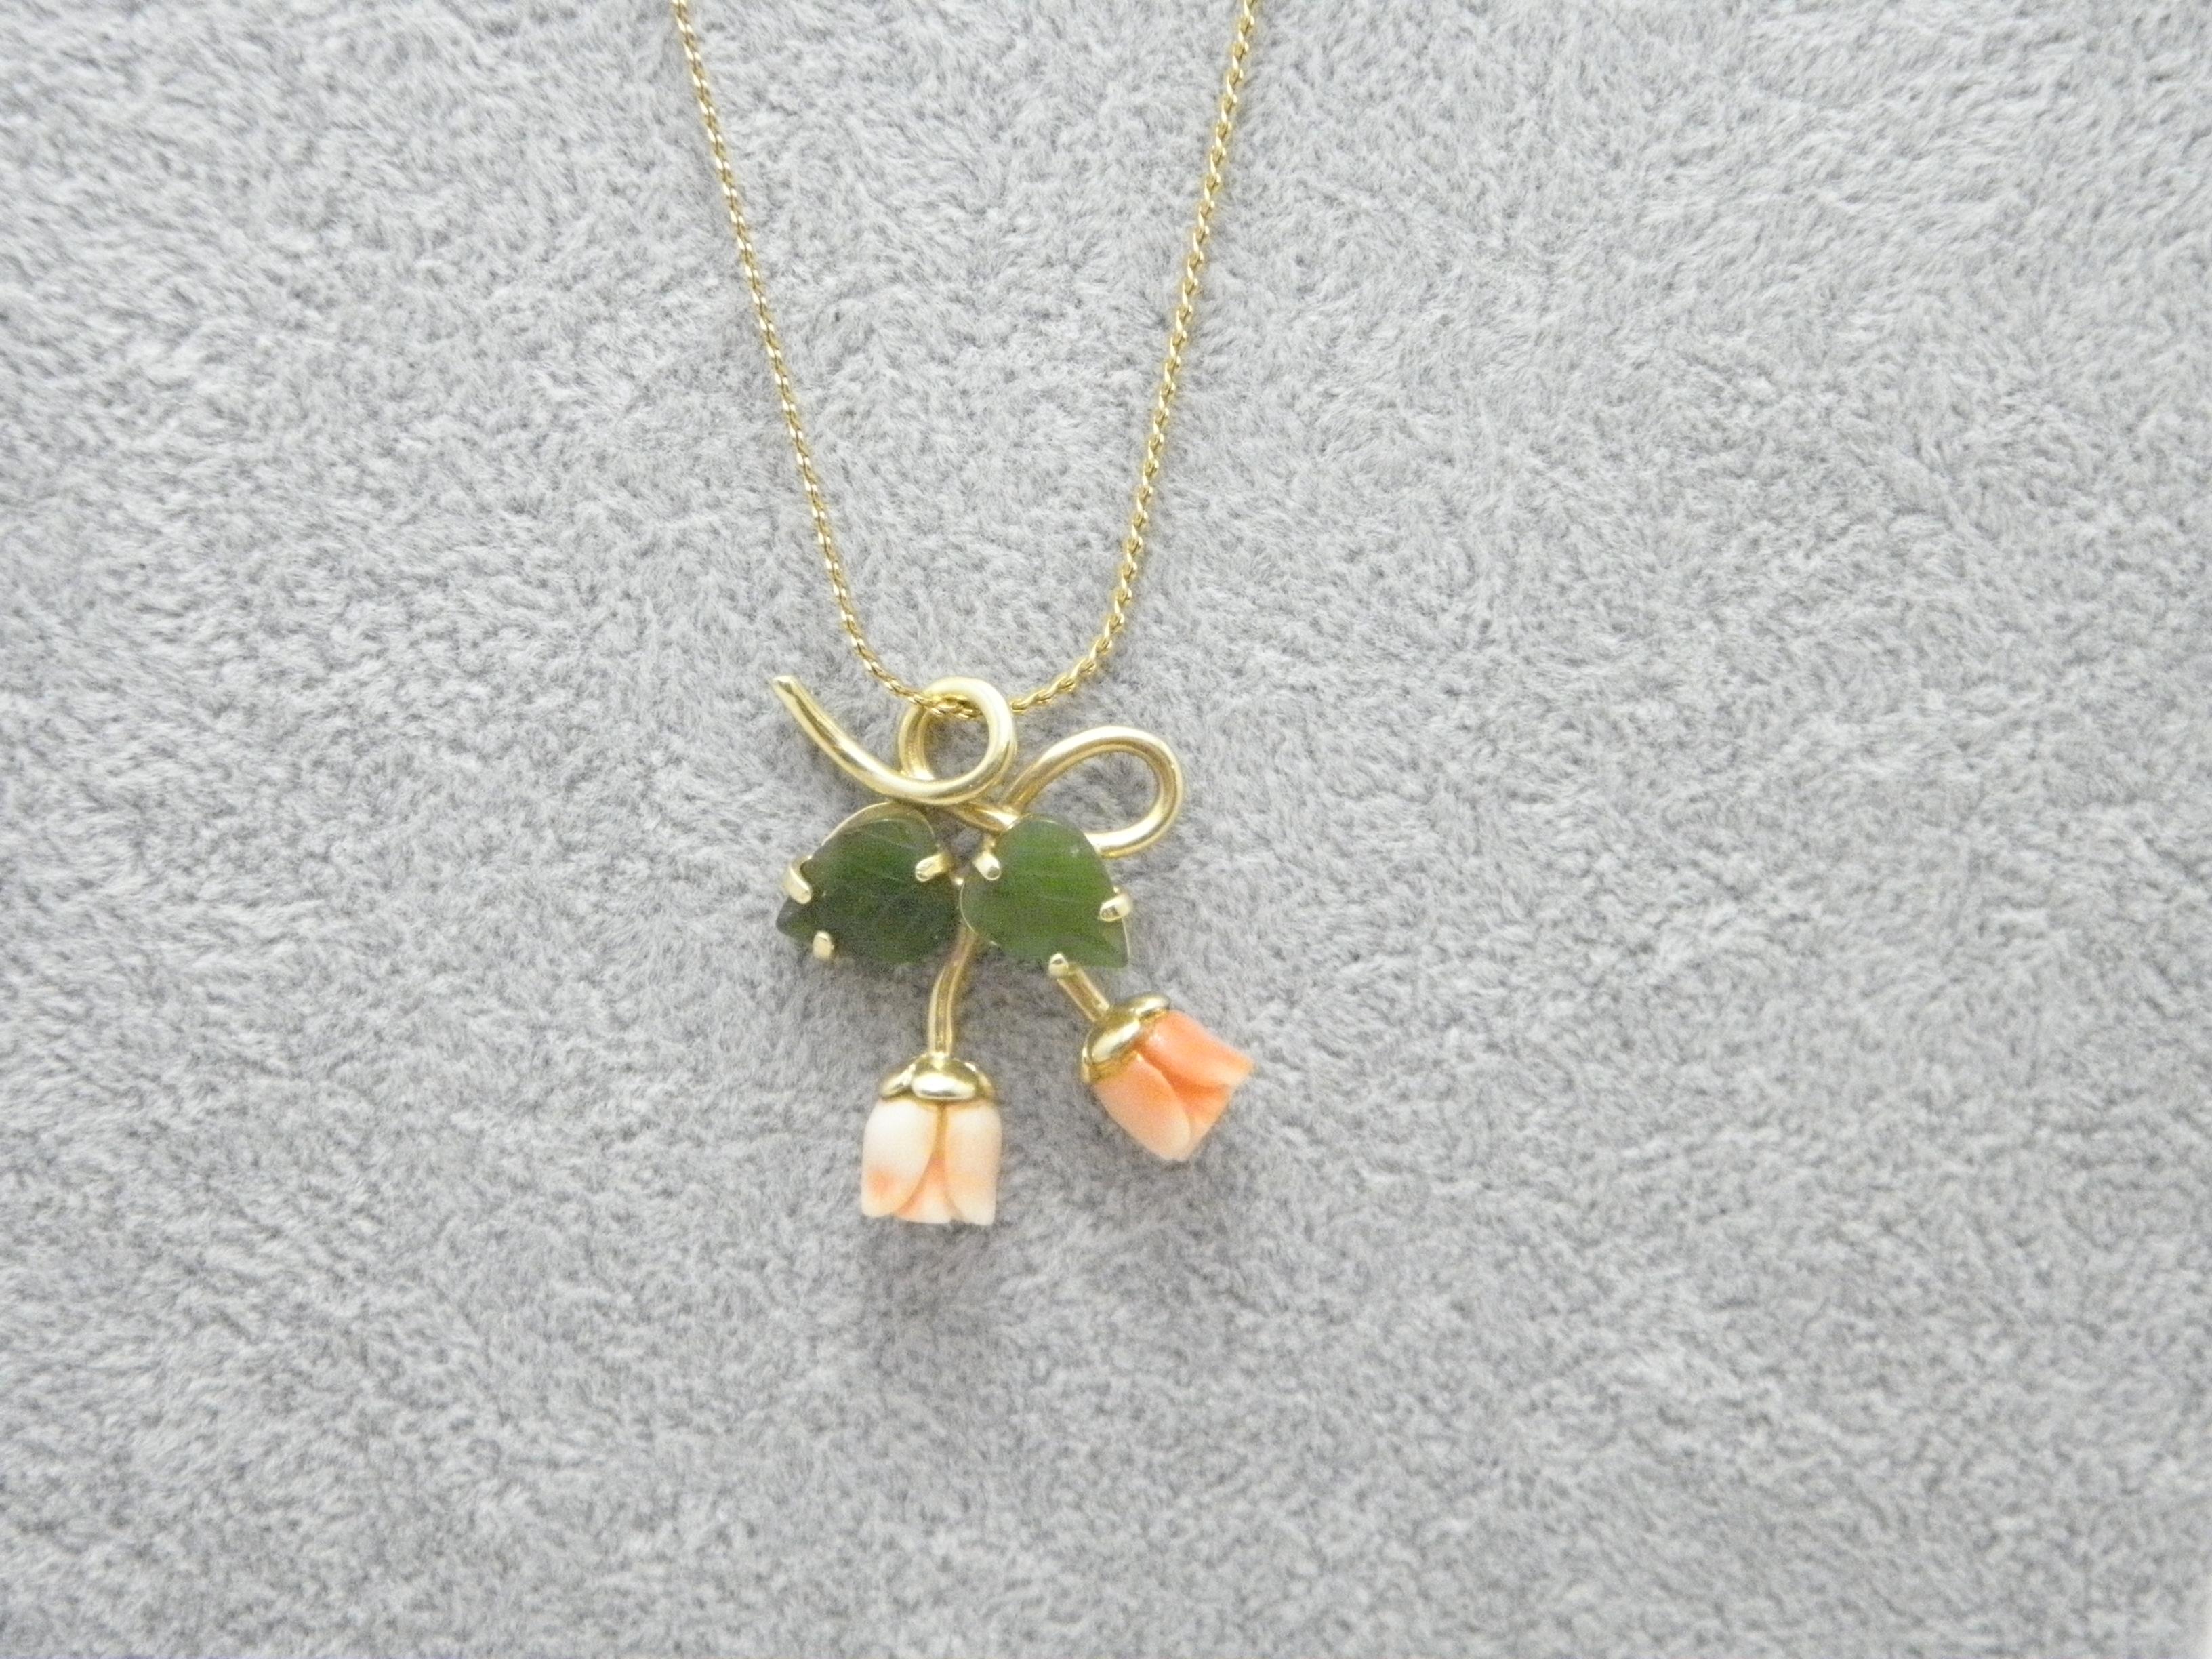 If you have landed on this page then you have an eye for beauty.

On offer is this gorgeous

14CT GOLD ART DECO JADE AND CORAL TWIN ROSES PENDANT NECKLACE

PENDANT DESCRIPTION
DETAILS
Material: Solid 14ct (585/000) yellow gold
Style: Handmade gem